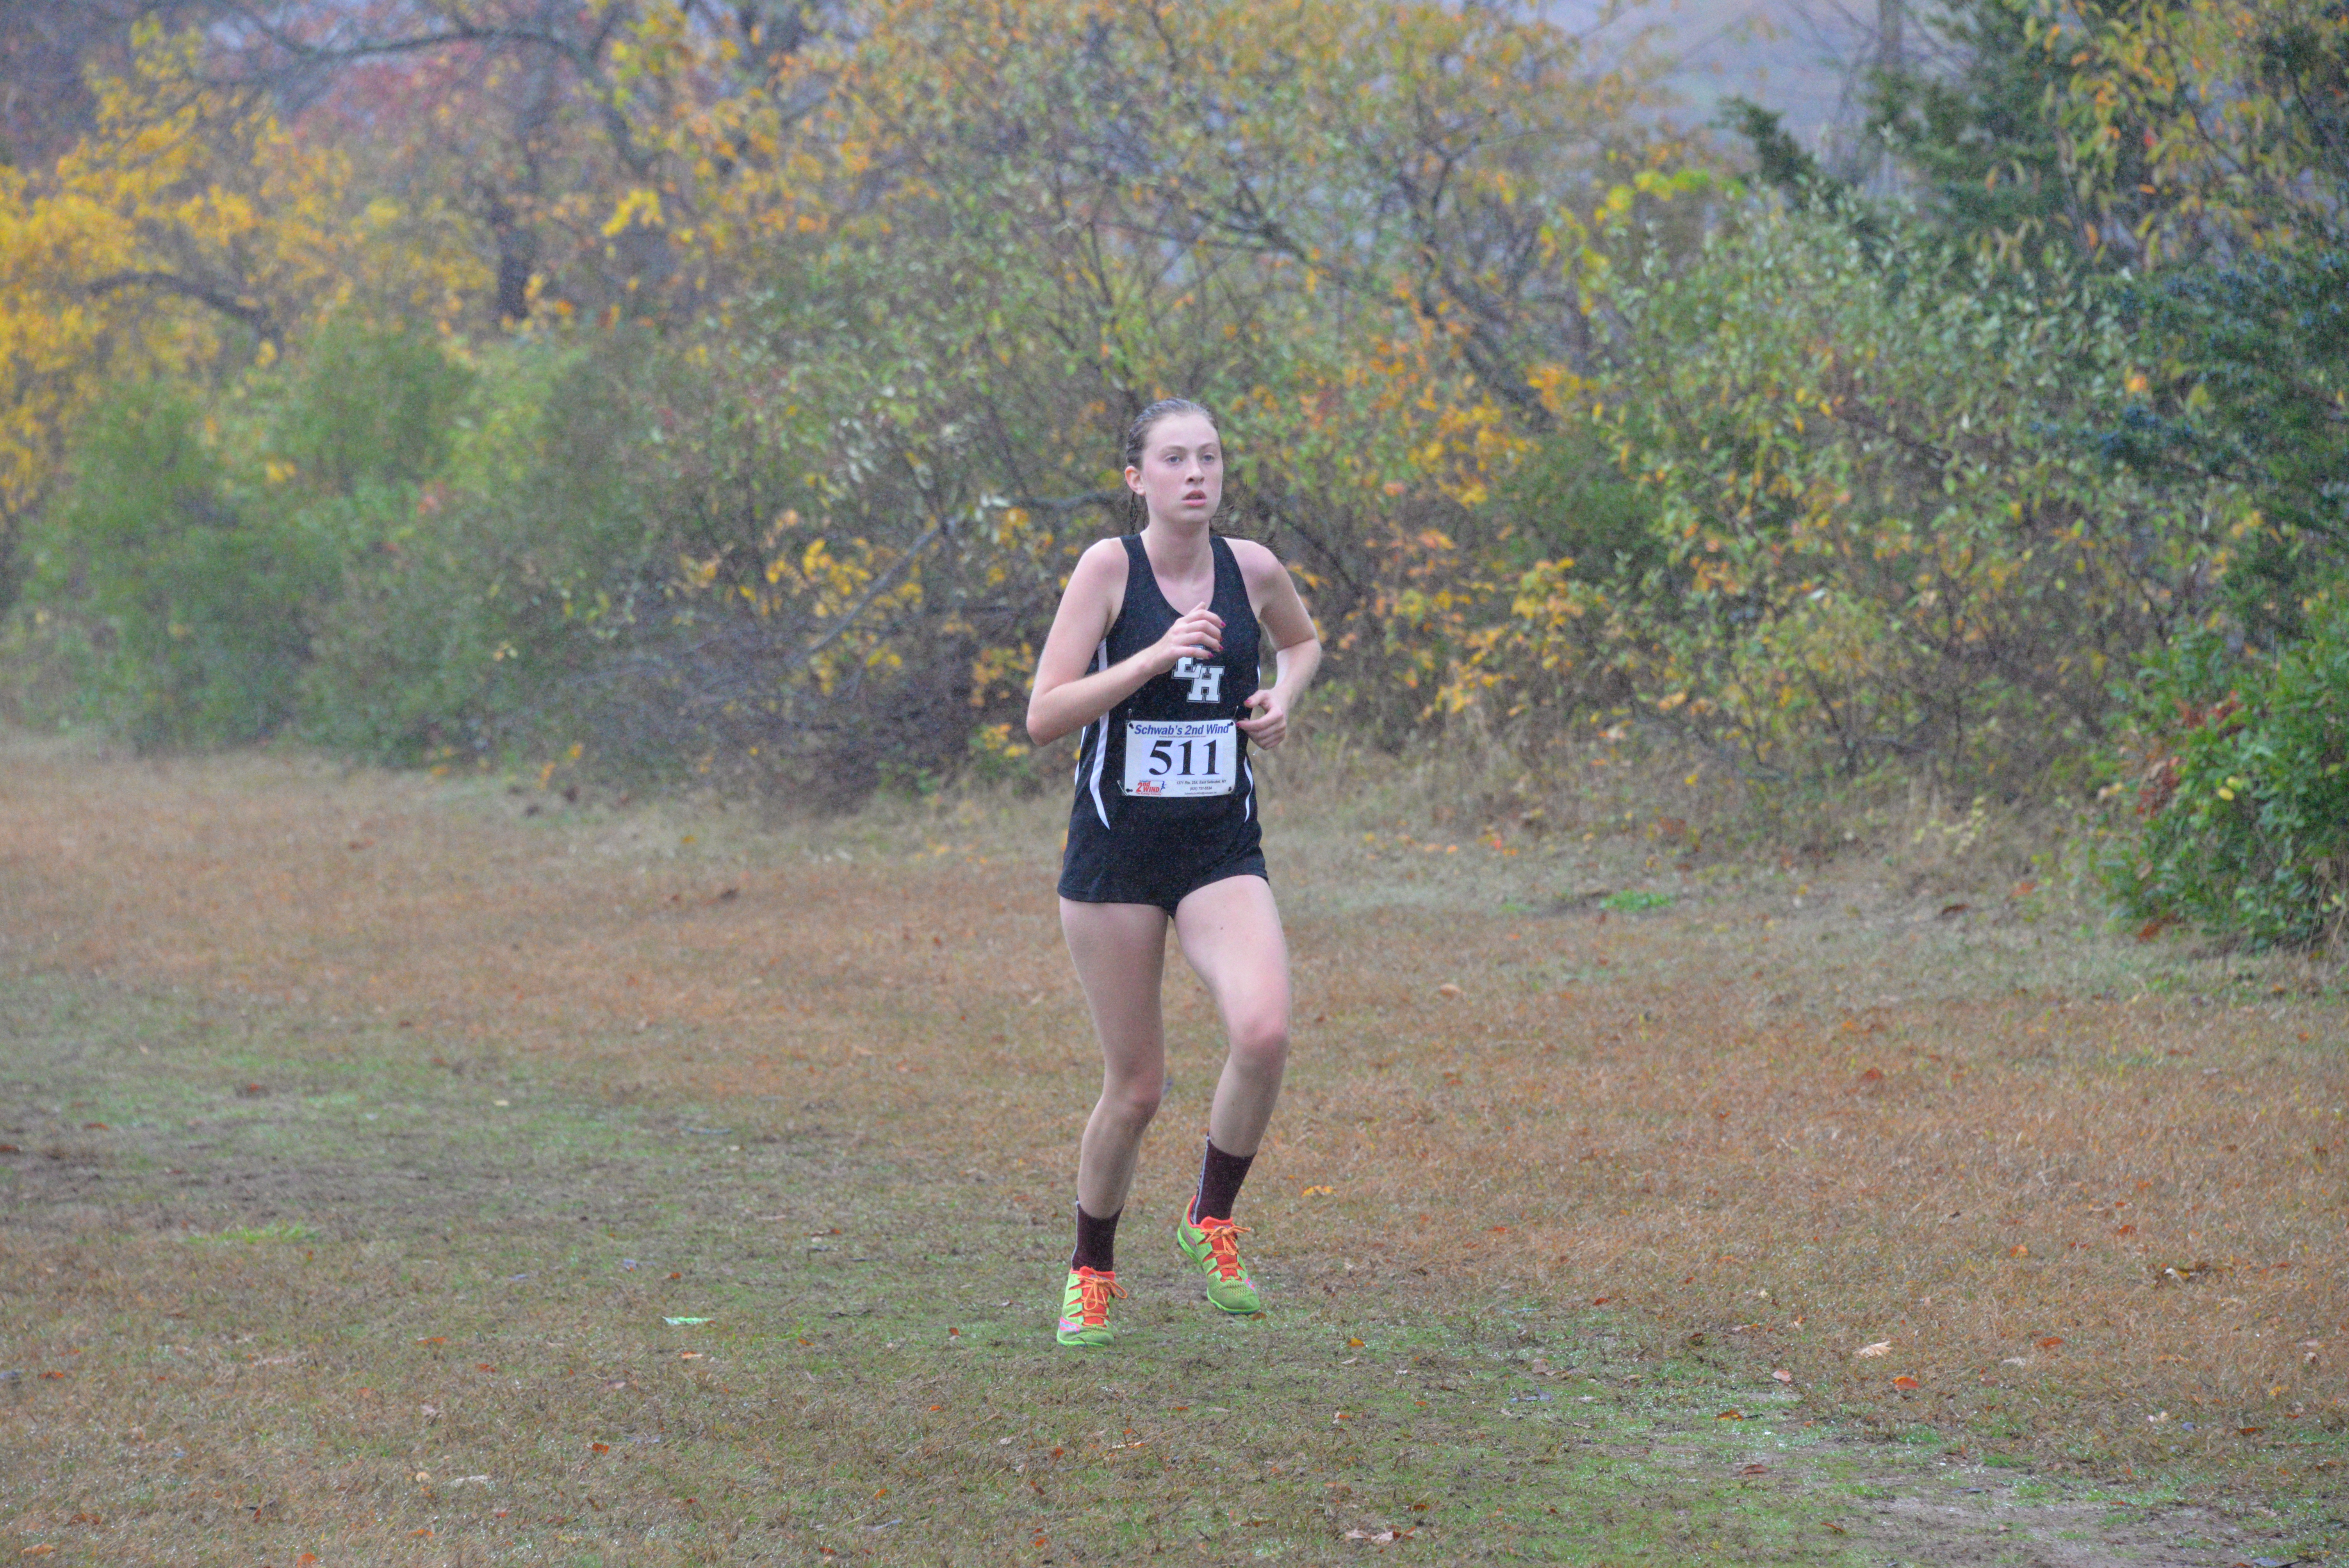 East Hampton junior Ava Engstrom was under the weather at last week's division meet but still put forth a good effort and was the second Lady Bonacker to finish the race.